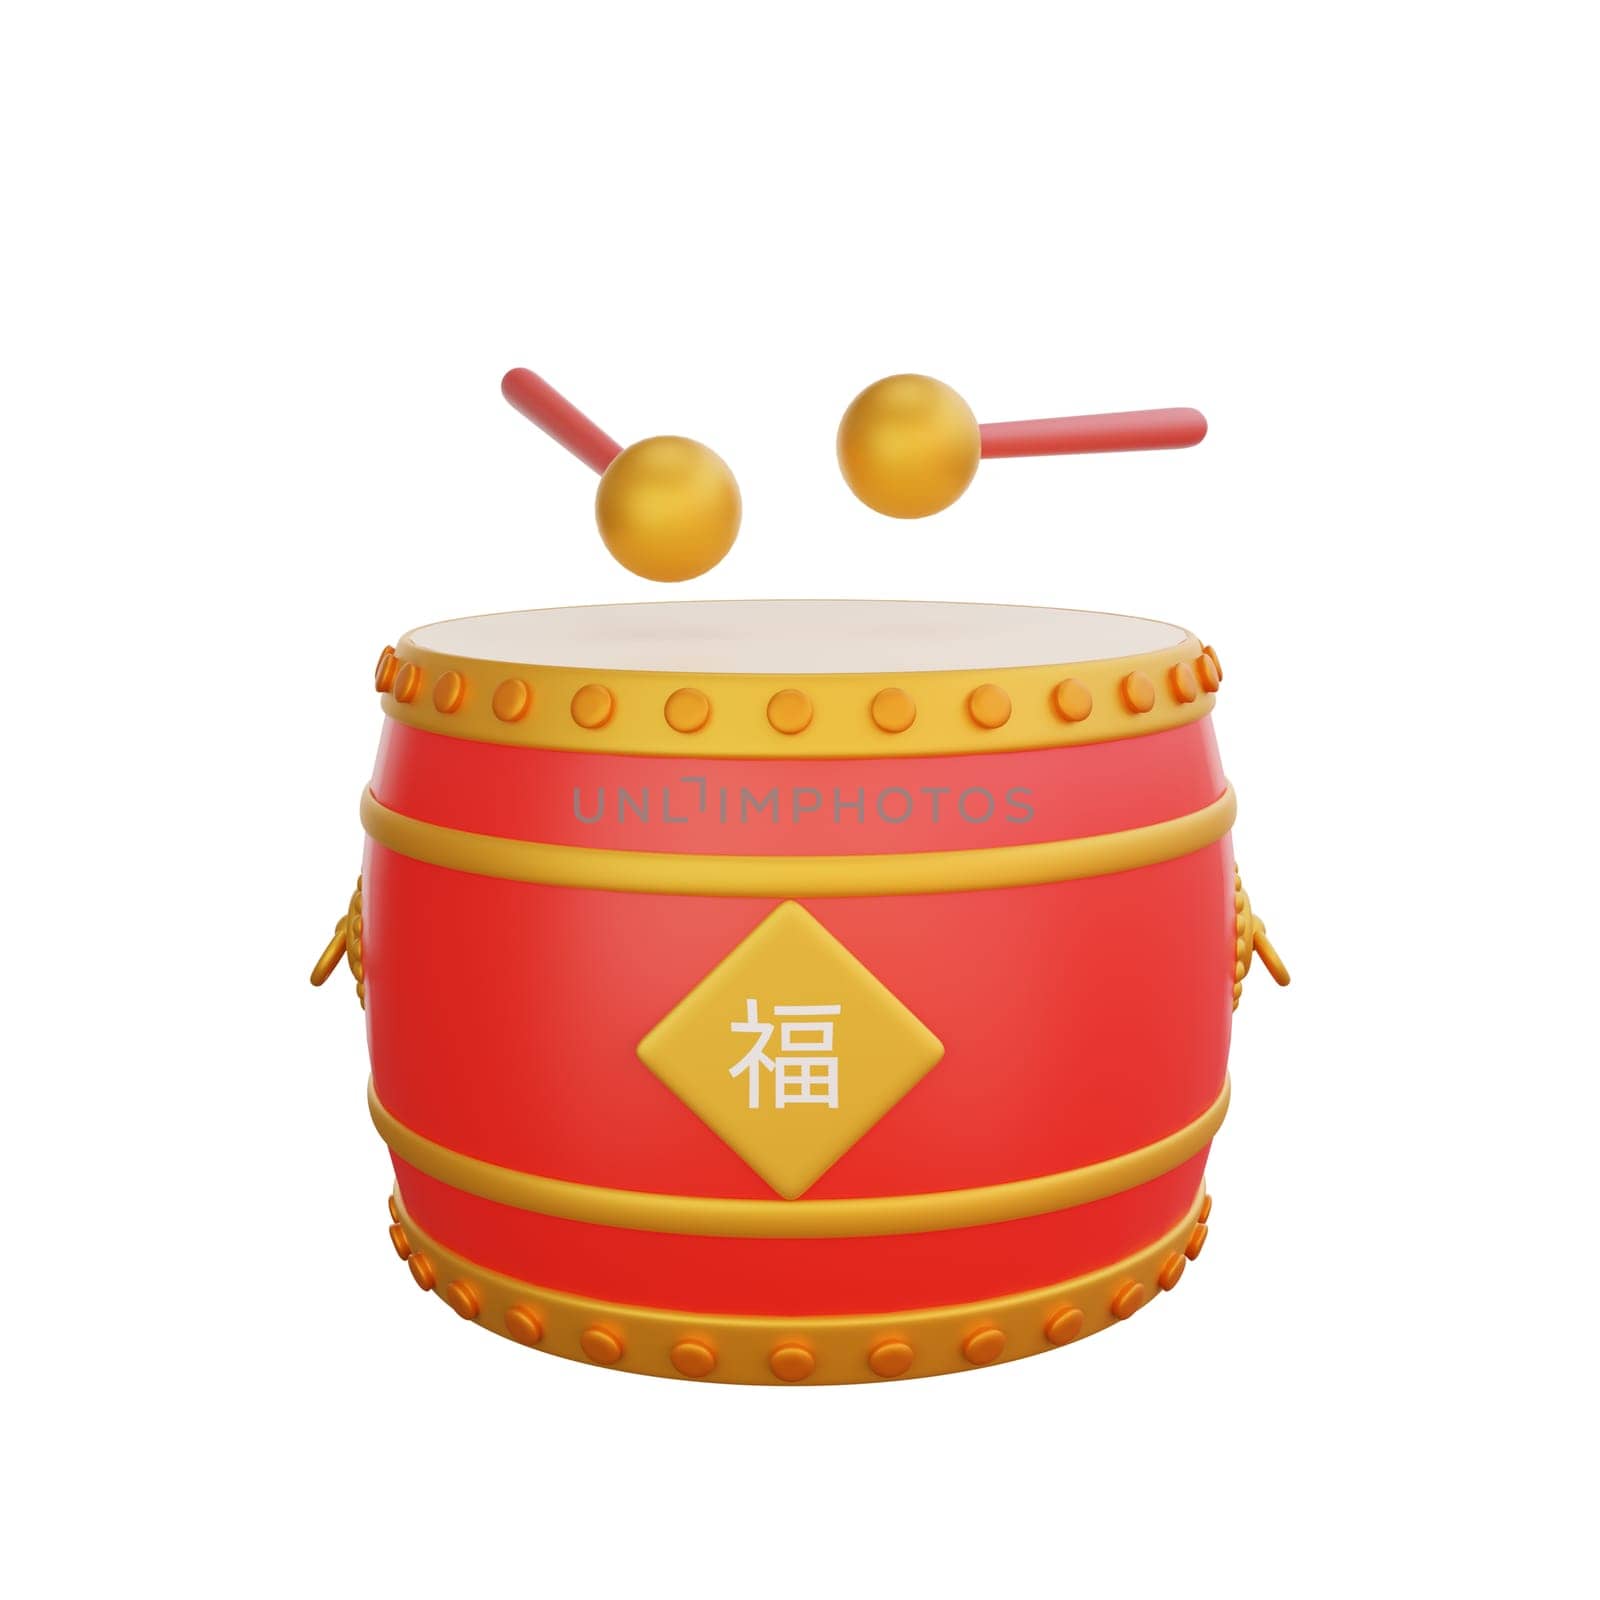 3D illustration of Chinese Drum icon, perfect for a Chinese New Year theme